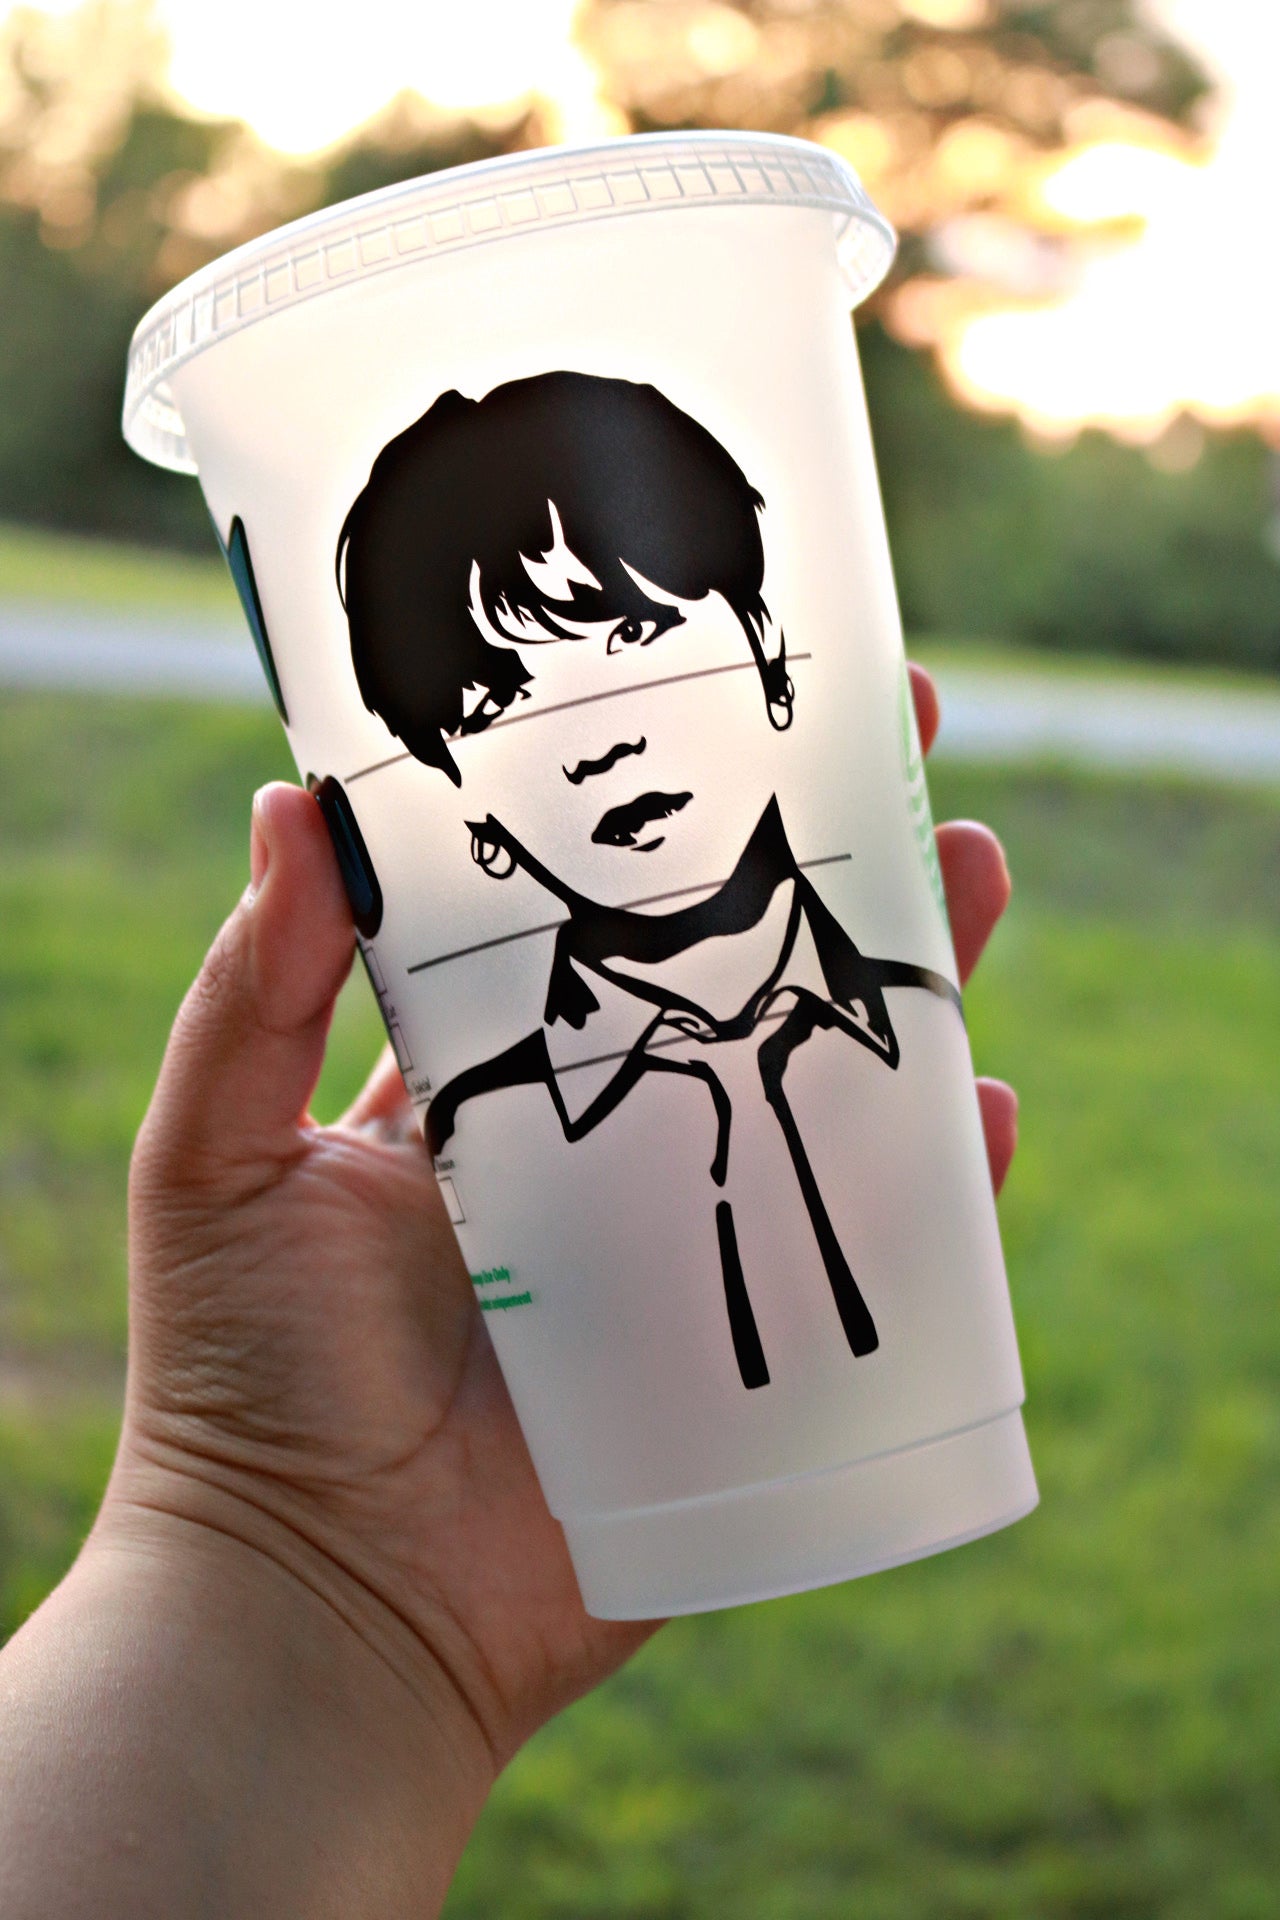 BTS Starbucks Cup – Simply with Euphoria